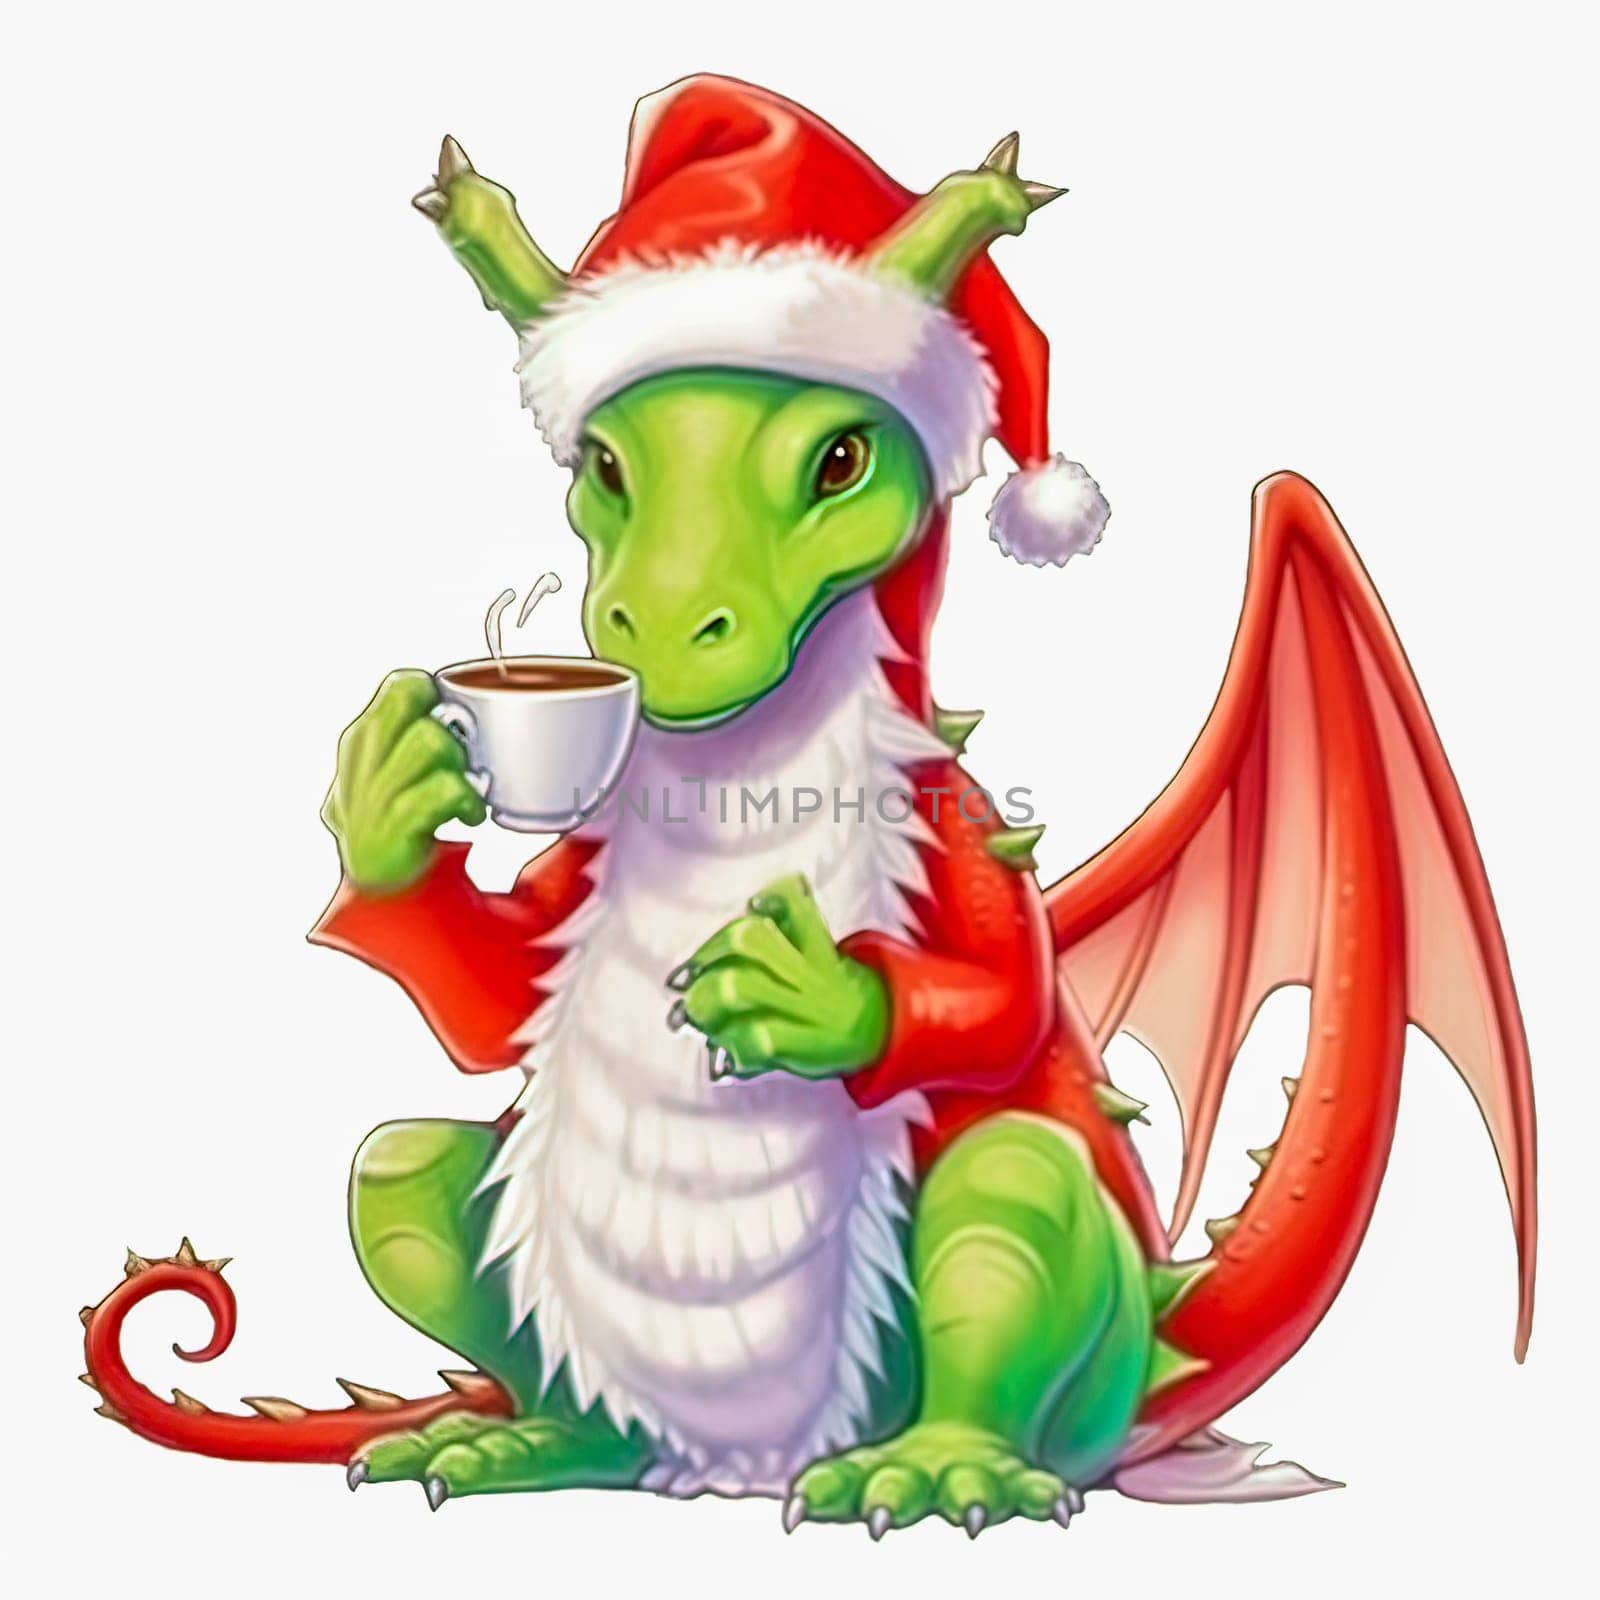 Illustration of a small green dragon in a red cap with a cup of coffee on a white background. Year of the dragon. New Year illustration. High quality illustration